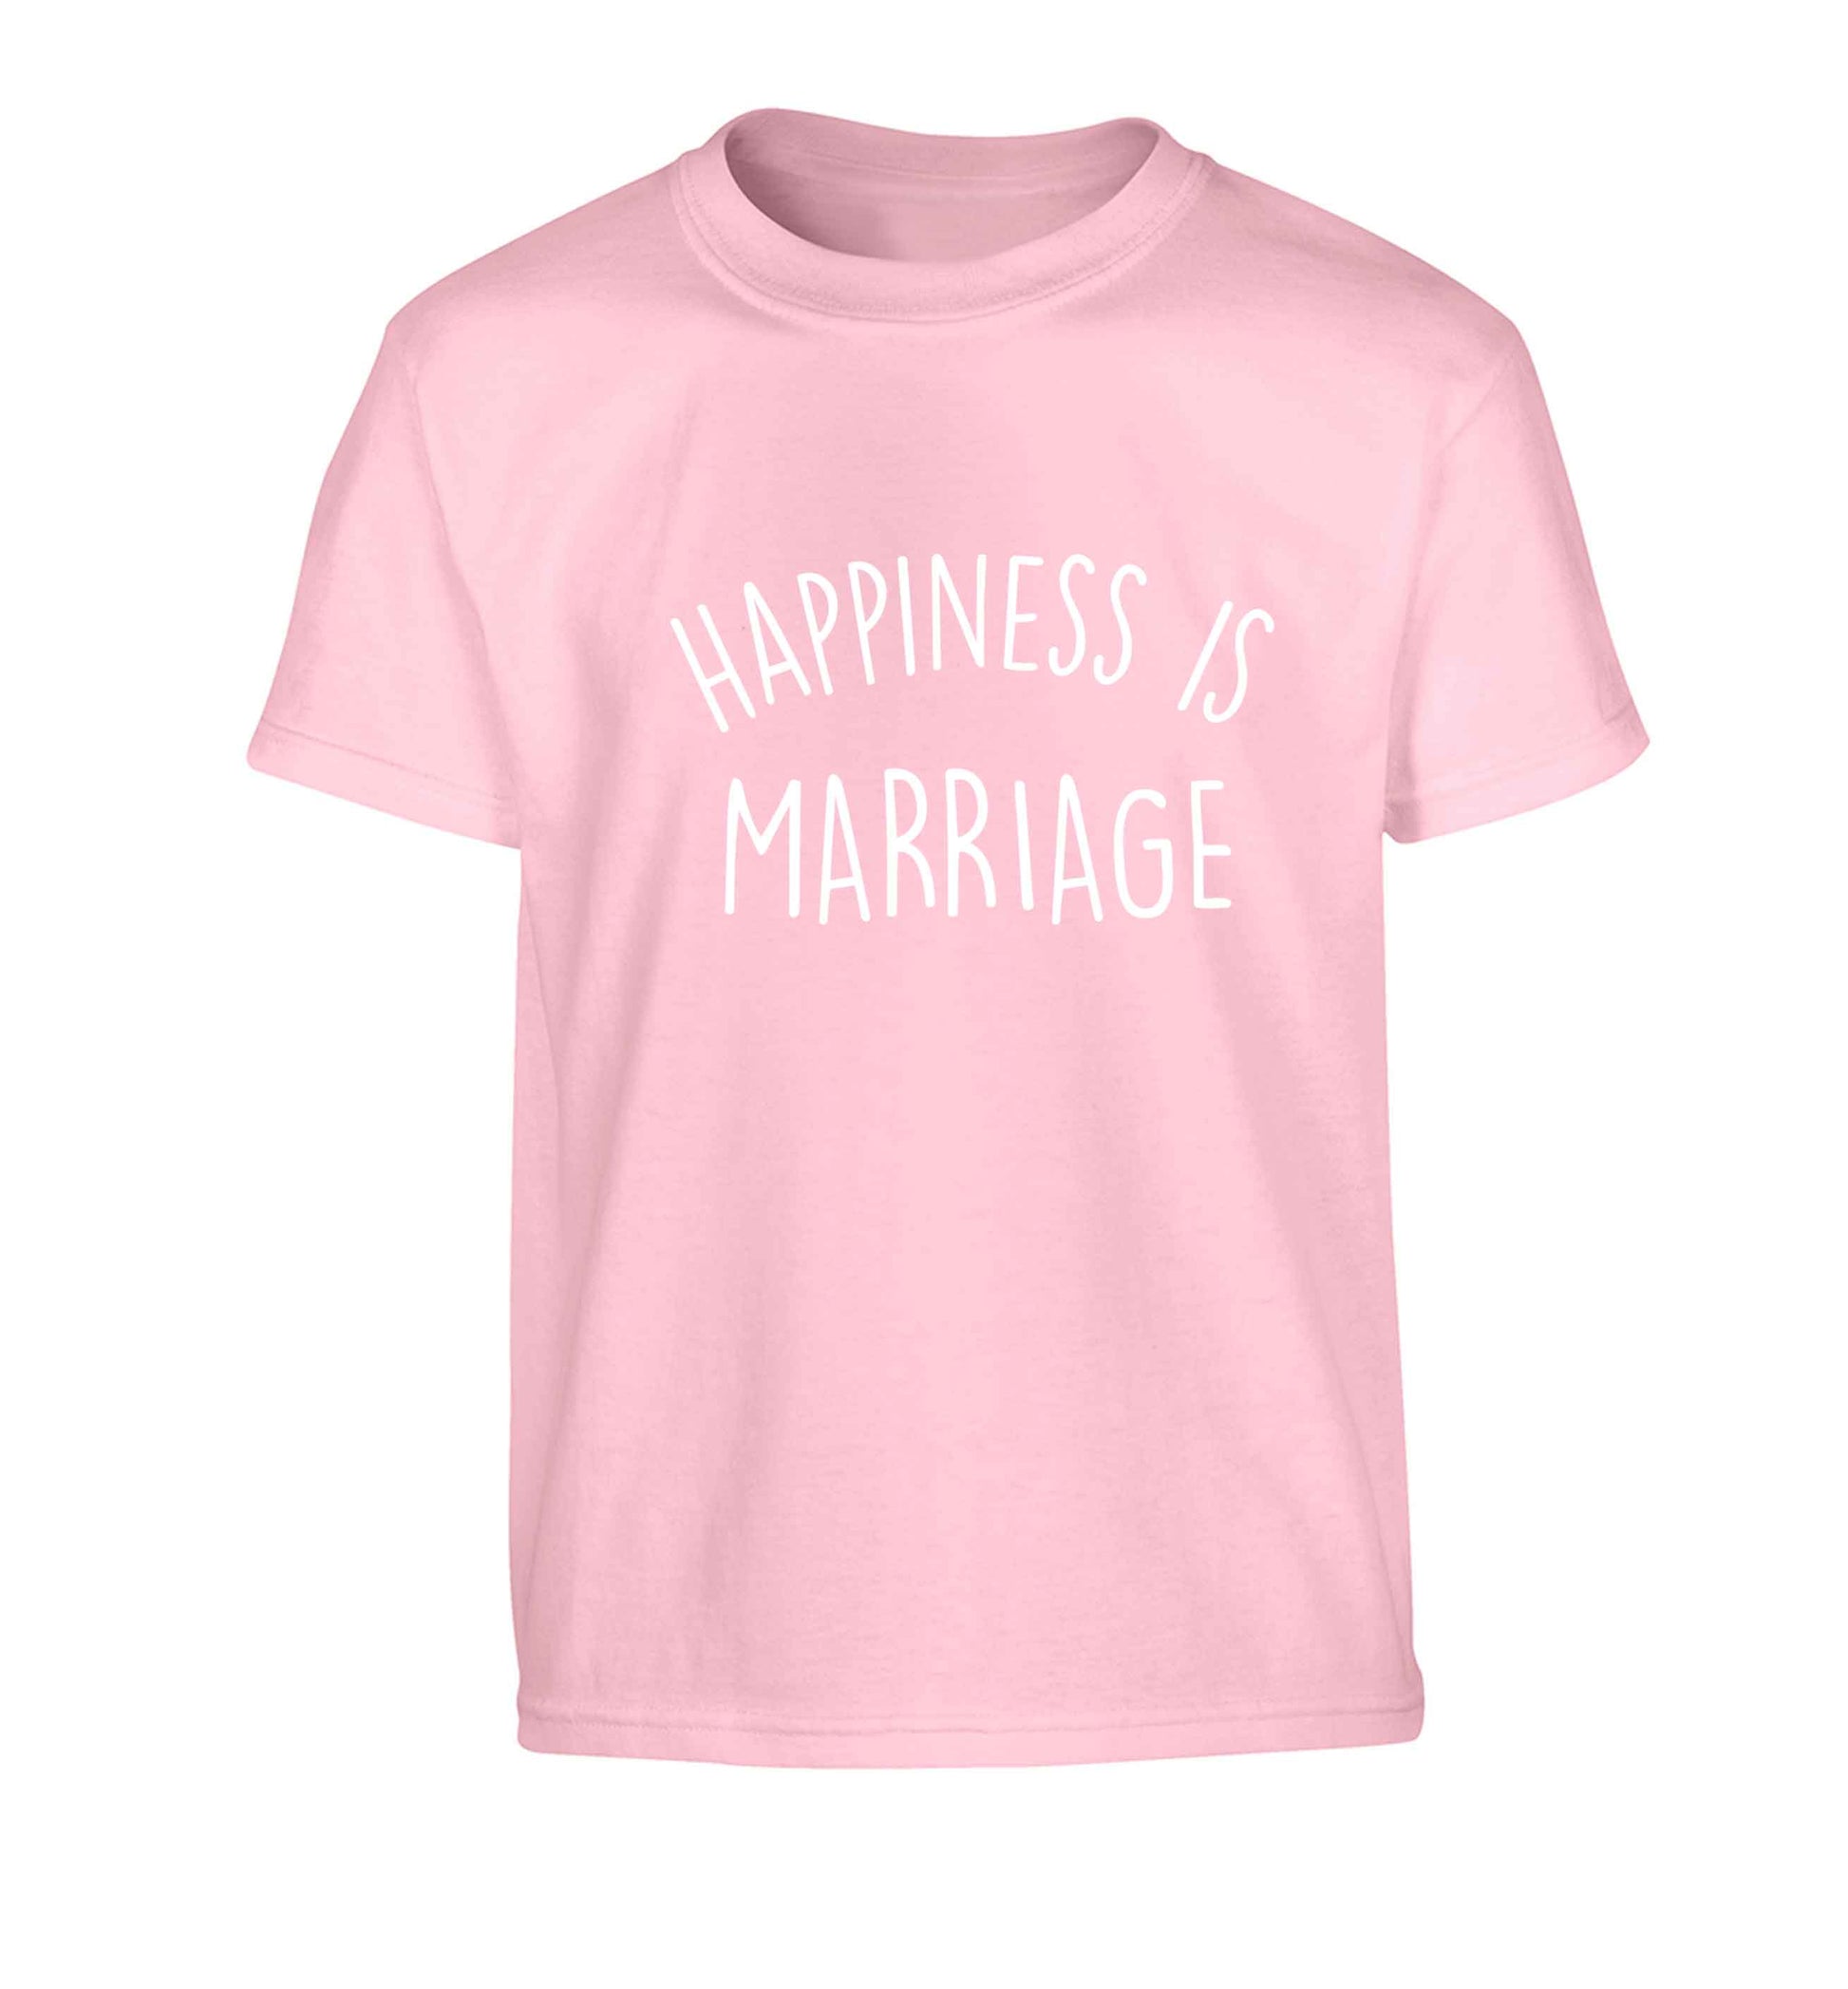 Happiness is marriage Children's light pink Tshirt 12-13 Years